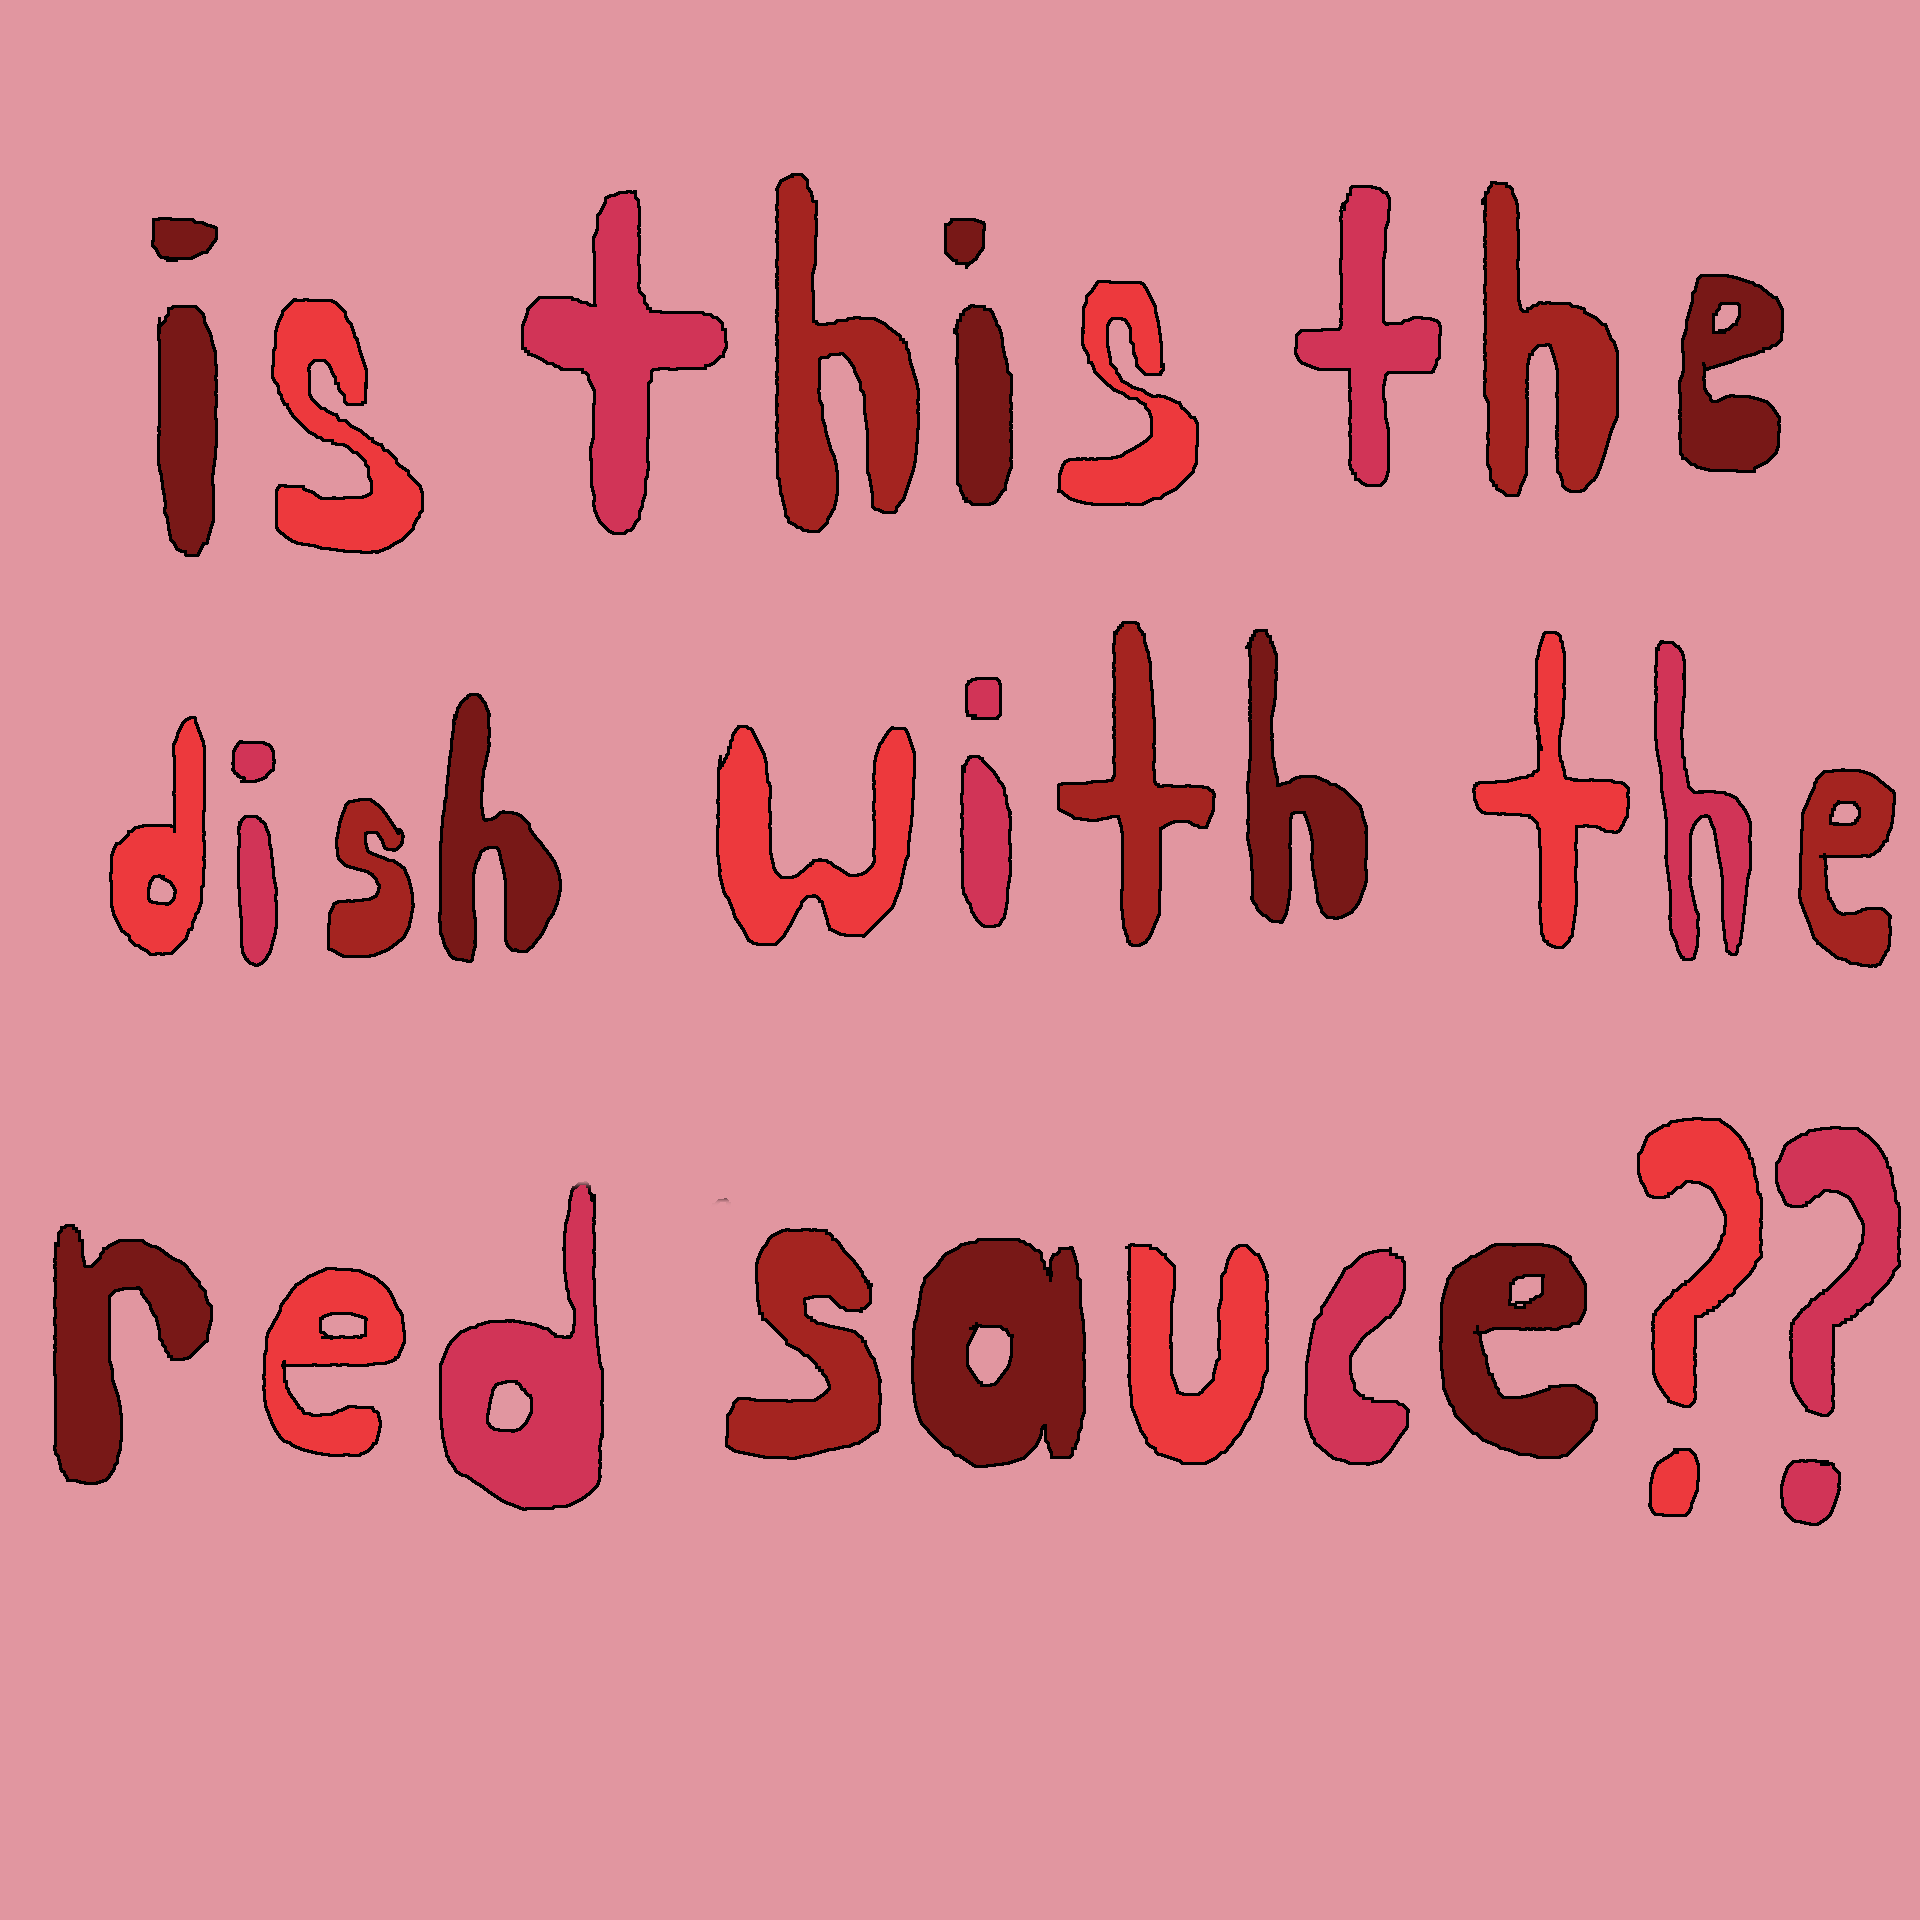 red sauce?